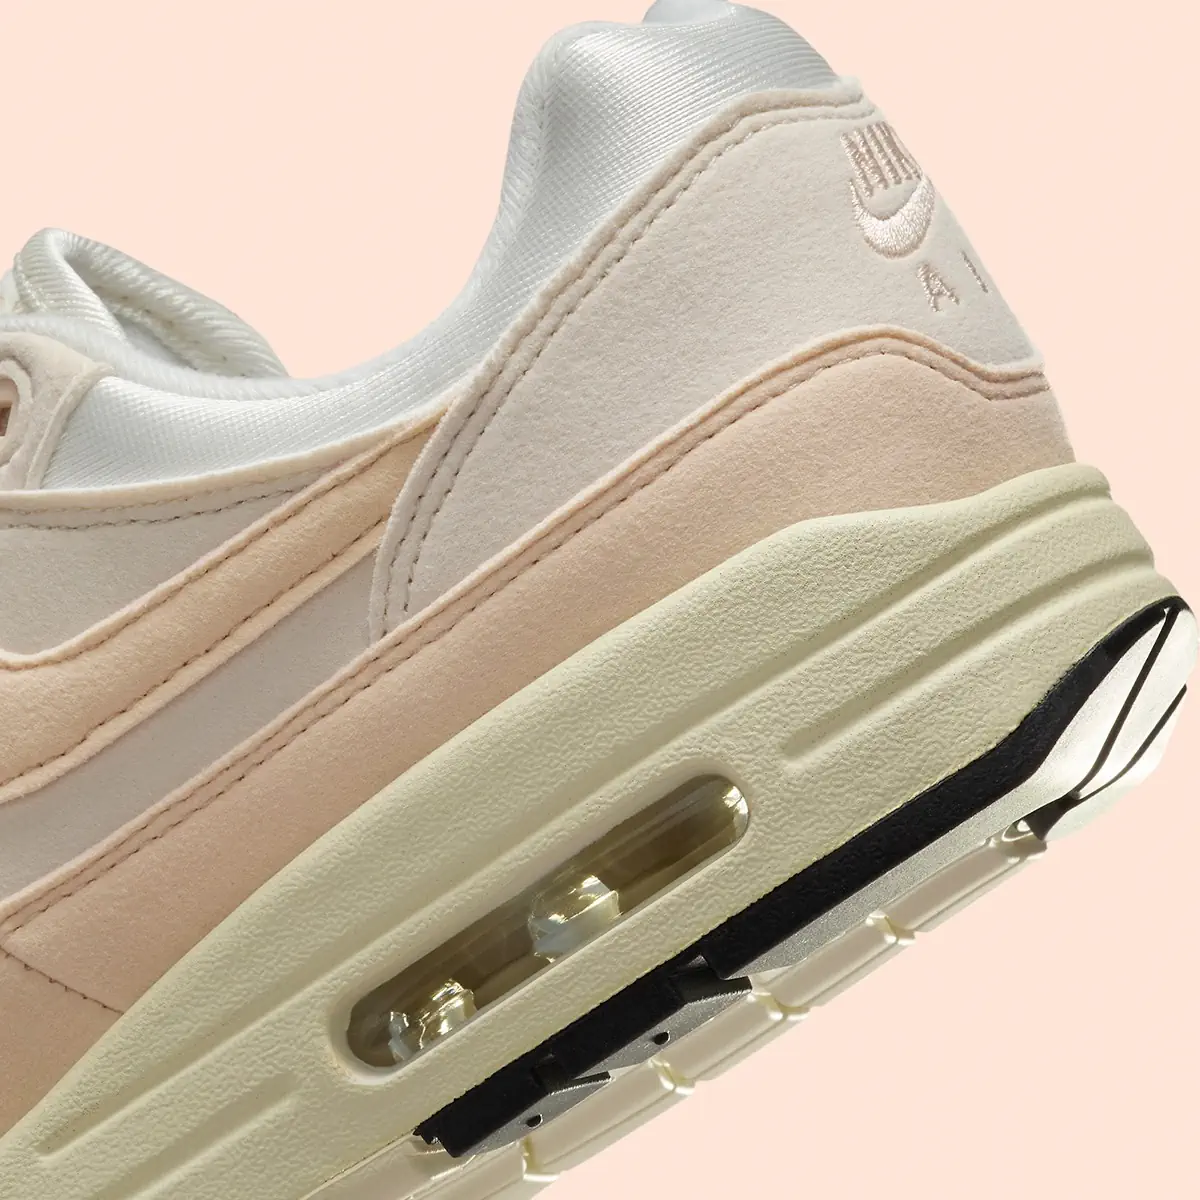 Nike Air Max 1 "Guava Ice" elevates women's sneakers with sophisticated pastels